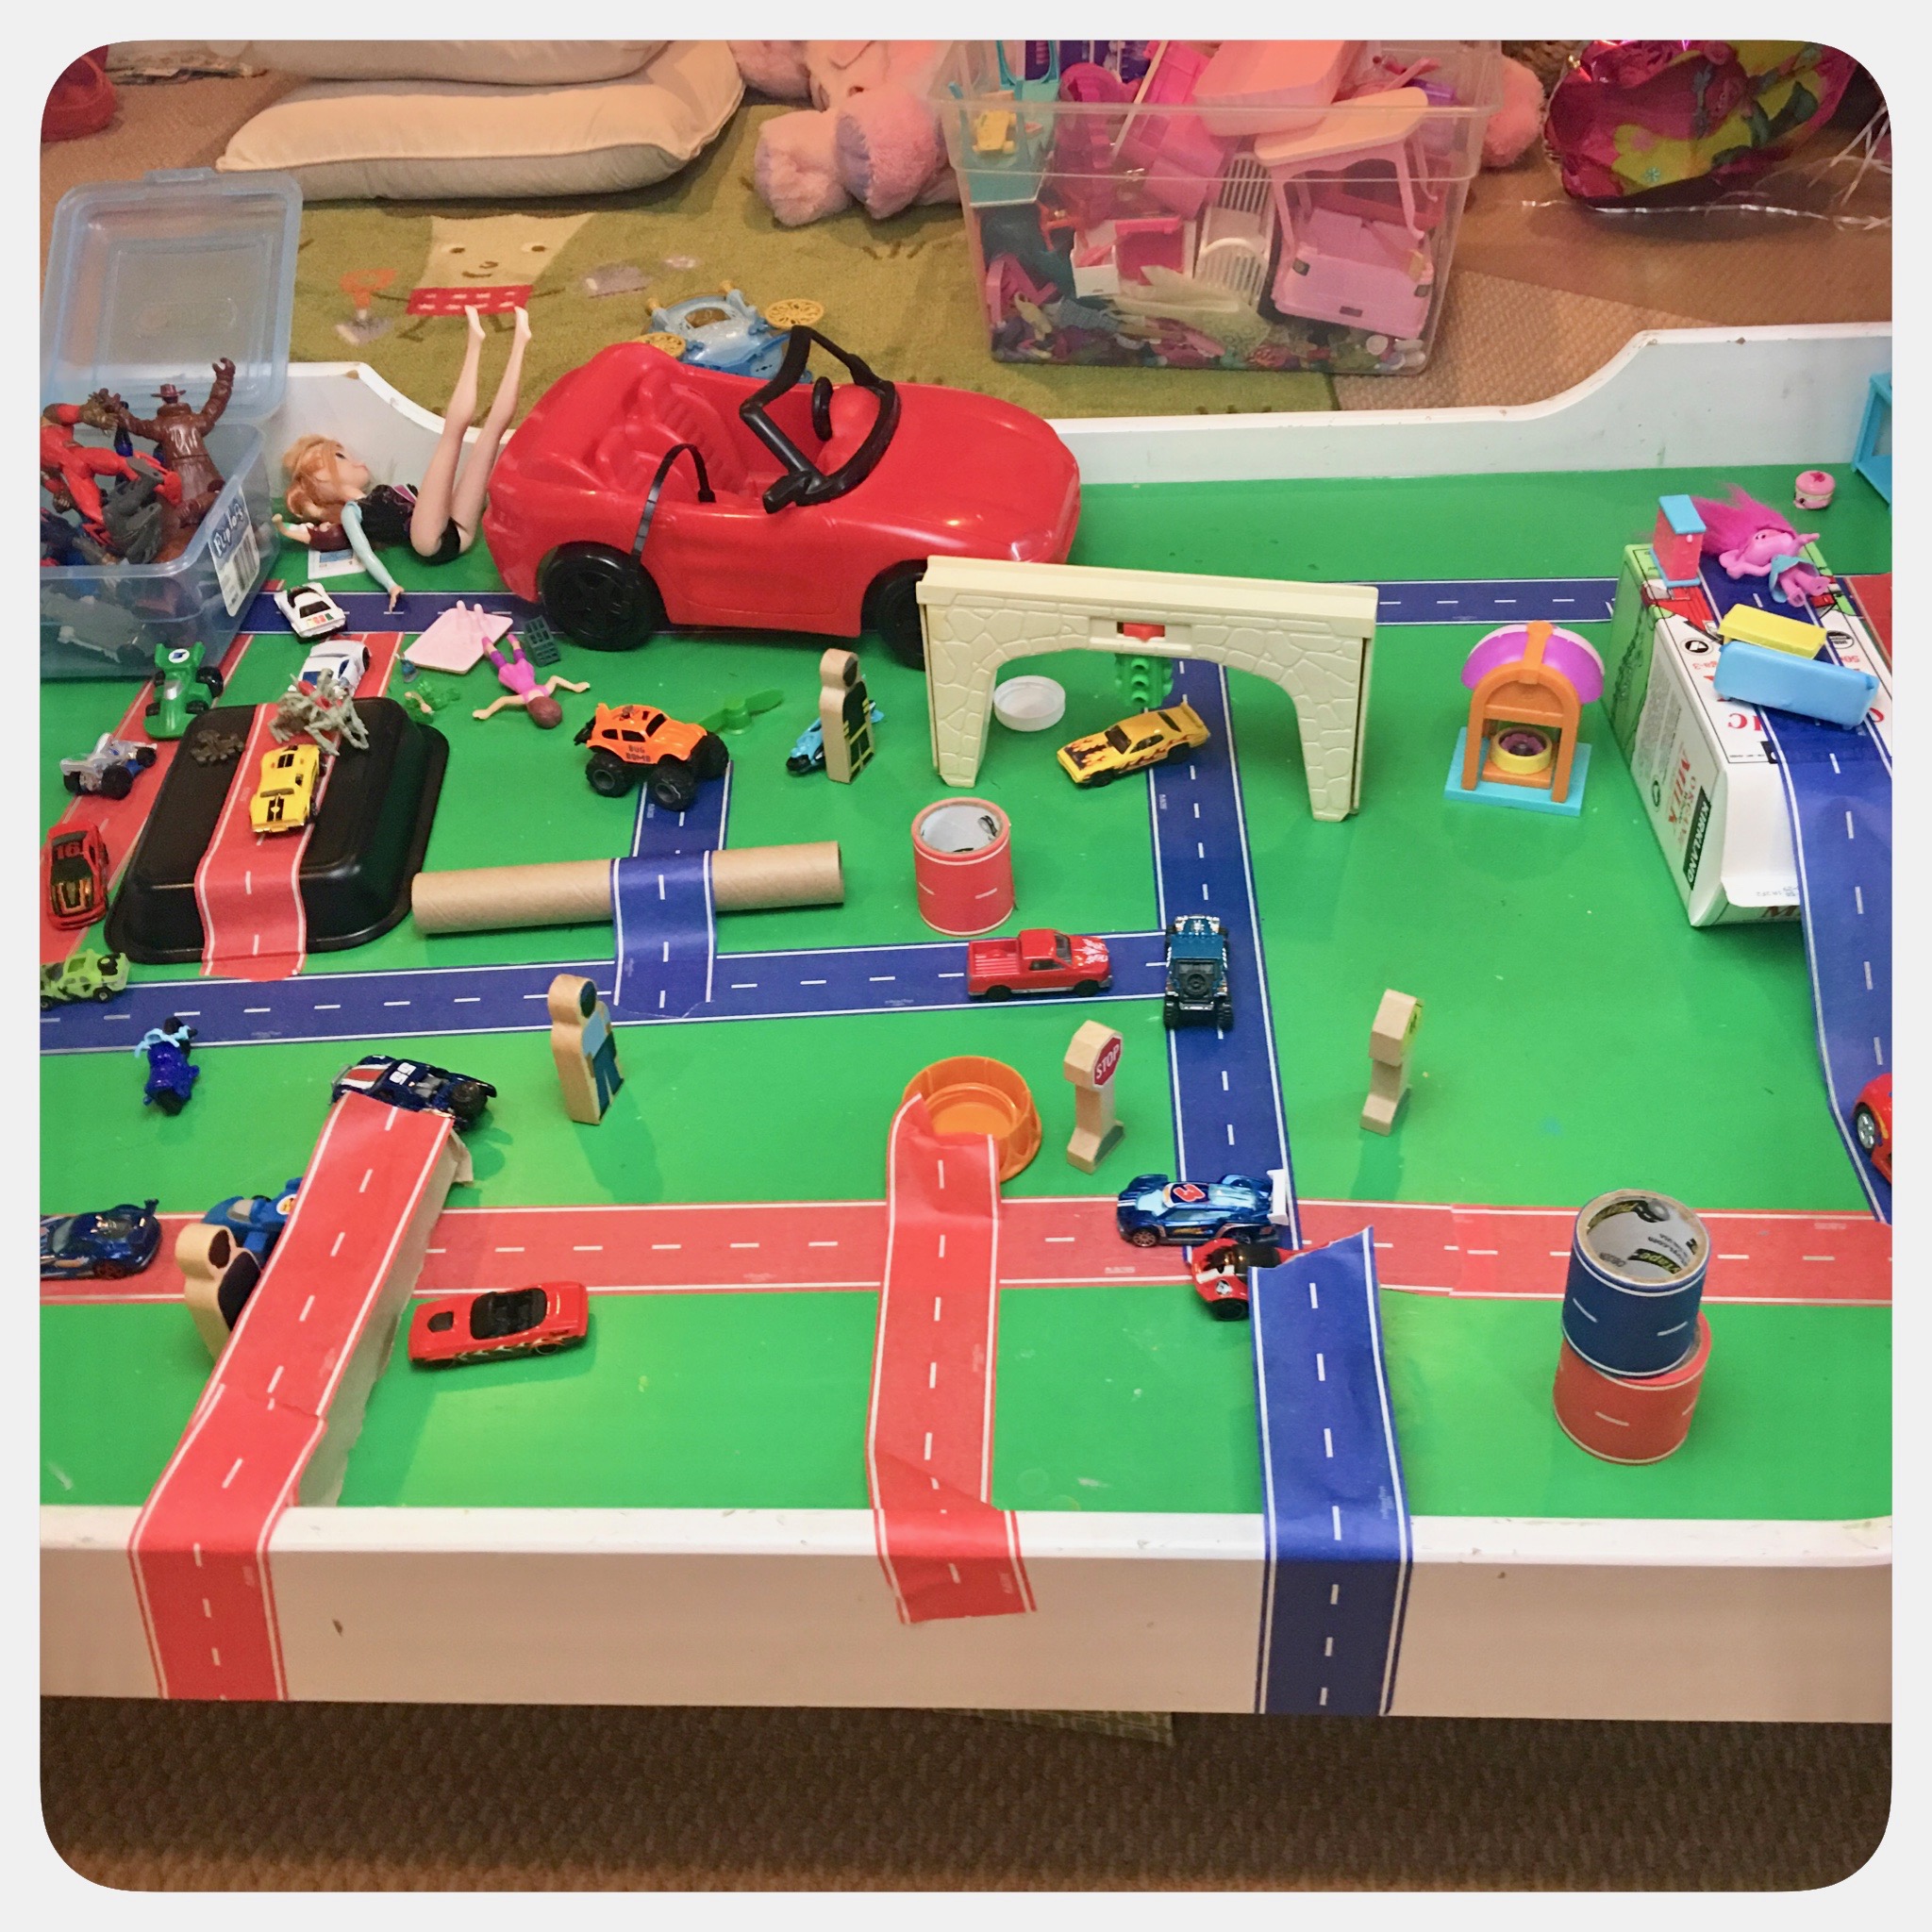 In Road Toys: great for letting kids express their our creativity and build a city exactly how they wish! This #playtape sticks but does not damage the surface at all and is super easy to pull off!